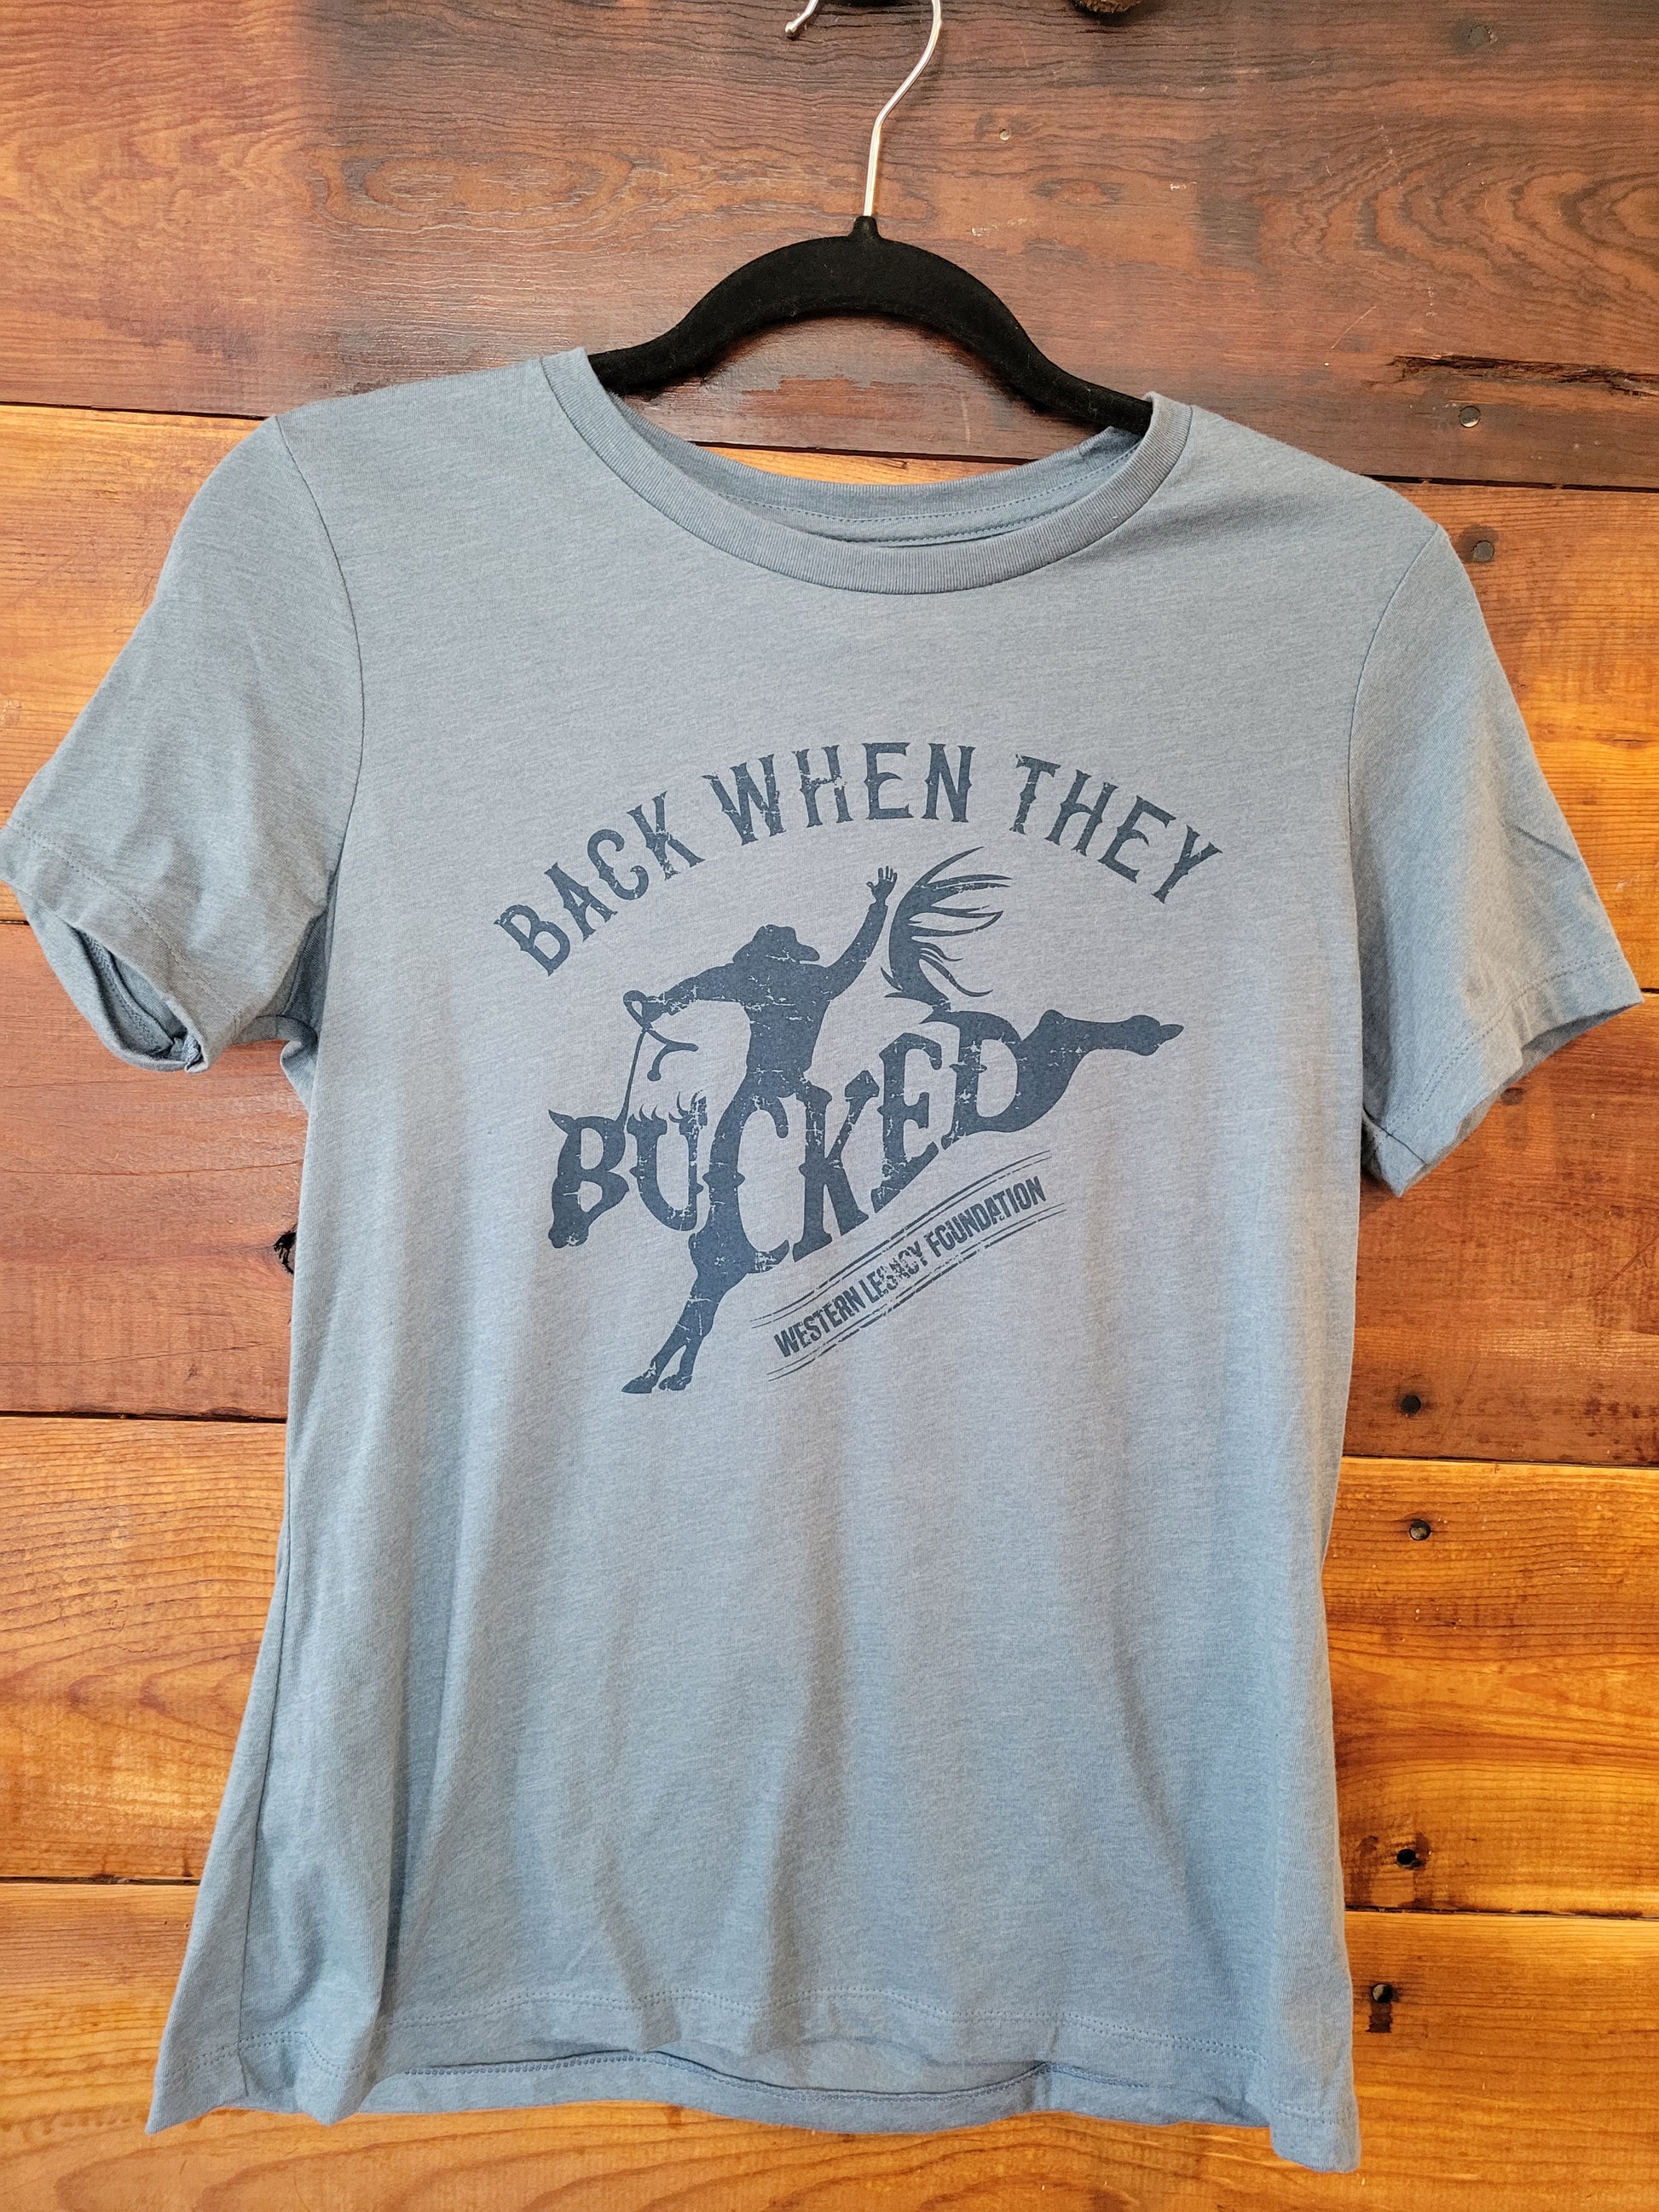 Back When They Bucked, Ladies Fit T-Shirt - White Owl Creek Boutique